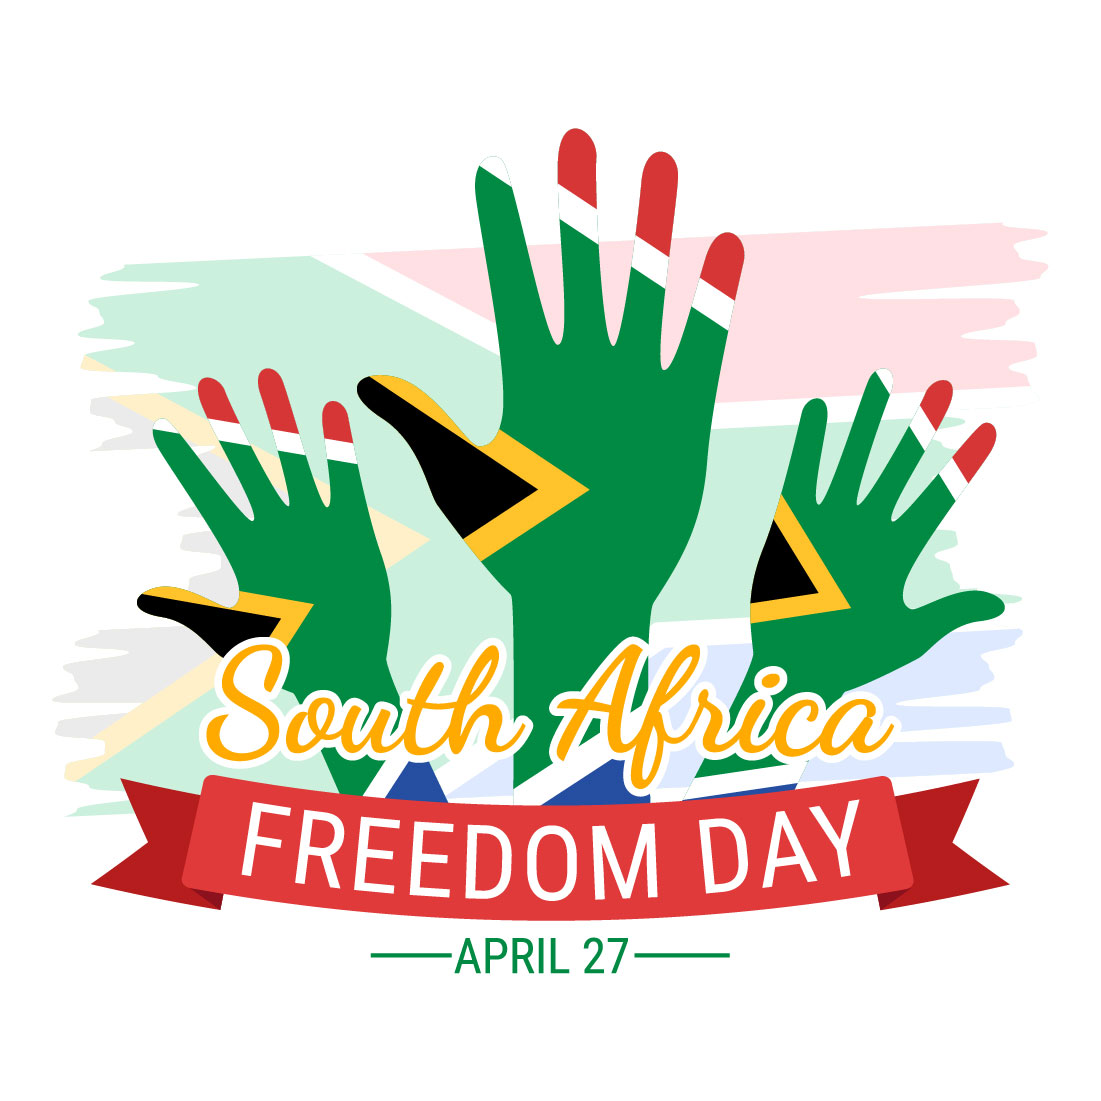 14 Happy South Africa Freedom Day Illustration preview image.